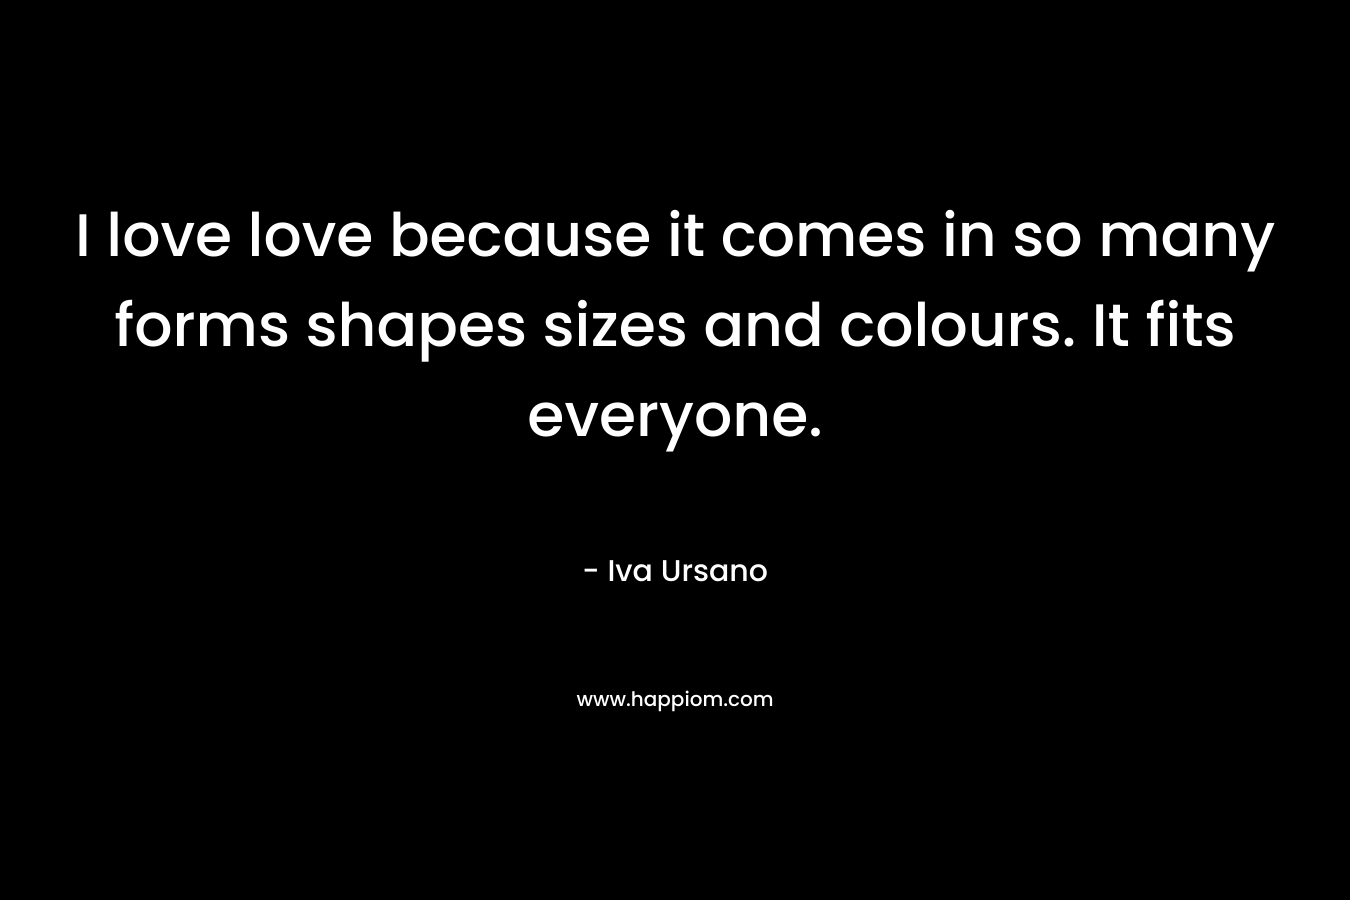 I love love because it comes in so many forms shapes sizes and colours. It fits everyone. – Iva Ursano